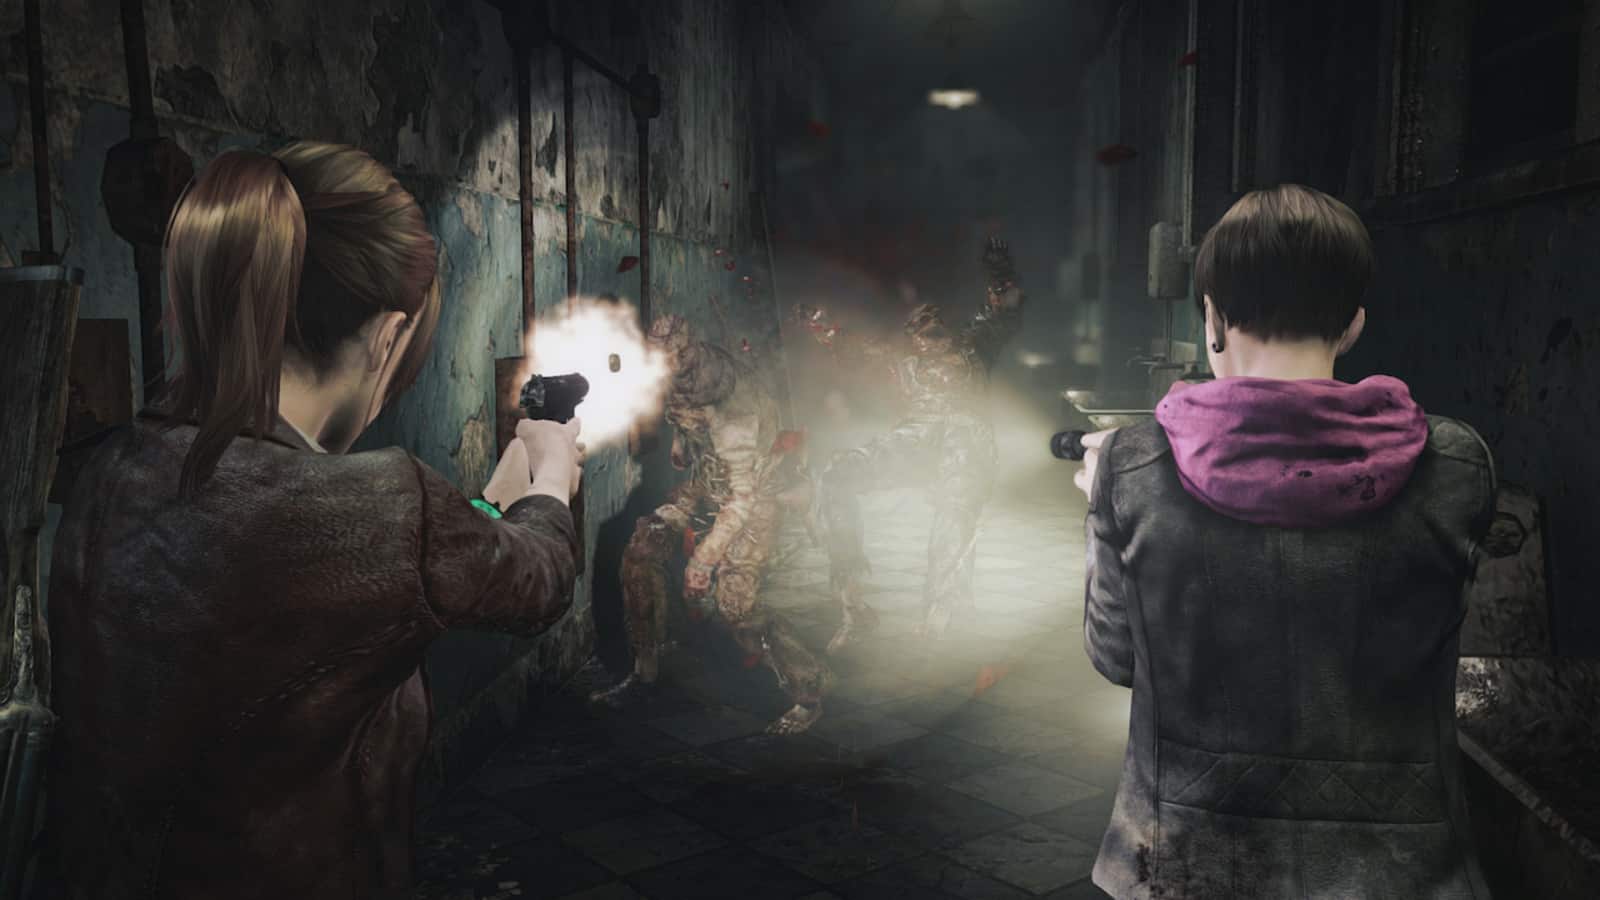 Resident Evil 4 Remake achievements are leaked on Reddit